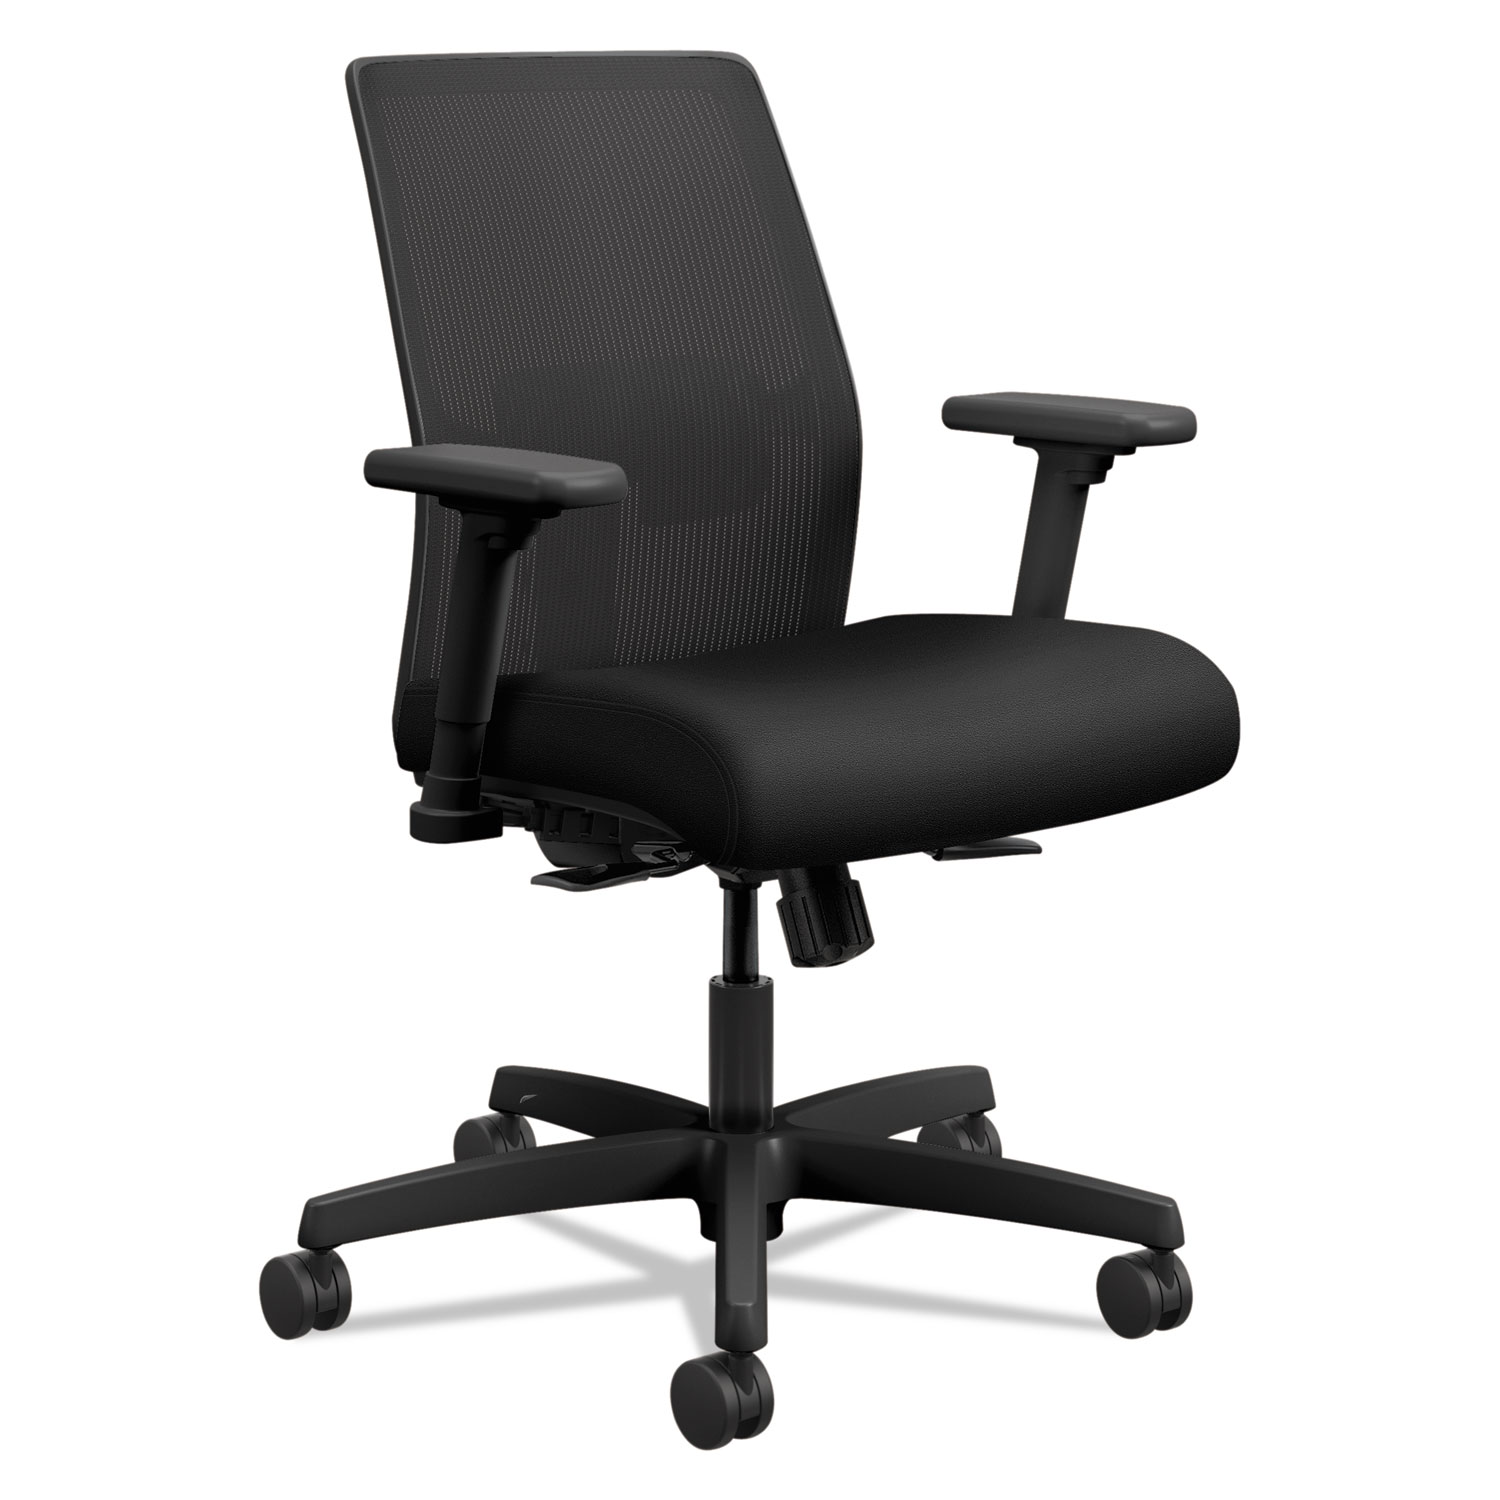  HON HONI2L1AMLC10TK Ignition 2.0 4-Way Stretch Low-Back Mesh Task Chair, Supports up to 300 lbs., Black Seat/Back, Black Base (HONI2L1AMLC10TK) 